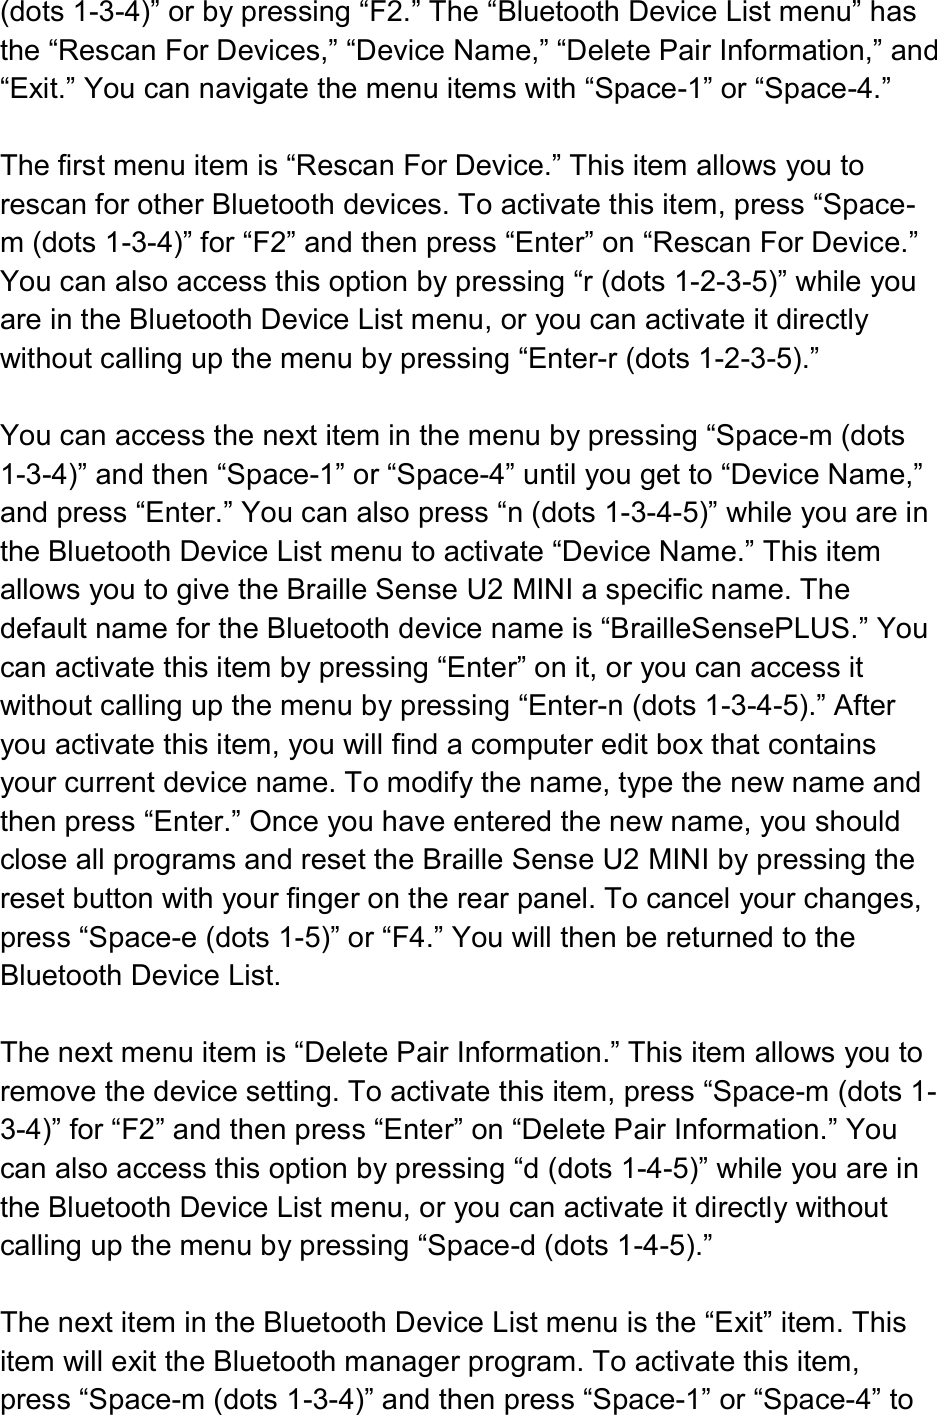  (dots 1-3-4)” or by pressing “F2.” The “Bluetooth Device List menu” has the “Rescan For Devices,” “Device Name,” “Delete Pair Information,” and “Exit.” You can navigate the menu items with “Space-1” or “Space-4.”  The first menu item is “Rescan For Device.” This item allows you to rescan for other Bluetooth devices. To activate this item, press “Space-m (dots 1-3-4)” for “F2” and then press “Enter” on “Rescan For Device.” You can also access this option by pressing “r (dots 1-2-3-5)” while you are in the Bluetooth Device List menu, or you can activate it directly without calling up the menu by pressing “Enter-r (dots 1-2-3-5).”  You can access the next item in the menu by pressing “Space-m (dots 1-3-4)” and then “Space-1” or “Space-4” until you get to “Device Name,” and press “Enter.” You can also press “n (dots 1-3-4-5)” while you are in the Bluetooth Device List menu to activate “Device Name.” This item allows you to give the Braille Sense U2 MINI a specific name. The default name for the Bluetooth device name is “BrailleSensePLUS.” You can activate this item by pressing “Enter” on it, or you can access it without calling up the menu by pressing “Enter-n (dots 1-3-4-5).” After you activate this item, you will find a computer edit box that contains your current device name. To modify the name, type the new name and then press “Enter.” Once you have entered the new name, you should close all programs and reset the Braille Sense U2 MINI by pressing the reset button with your finger on the rear panel. To cancel your changes, press “Space-e (dots 1-5)” or “F4.” You will then be returned to the Bluetooth Device List.  The next menu item is “Delete Pair Information.” This item allows you to remove the device setting. To activate this item, press “Space-m (dots 1-3-4)” for “F2” and then press “Enter” on “Delete Pair Information.” You can also access this option by pressing “d (dots 1-4-5)” while you are in the Bluetooth Device List menu, or you can activate it directly without calling up the menu by pressing “Space-d (dots 1-4-5).”  The next item in the Bluetooth Device List menu is the “Exit” item. This item will exit the Bluetooth manager program. To activate this item, press “Space-m (dots 1-3-4)” and then press “Space-1” or “Space-4” to 